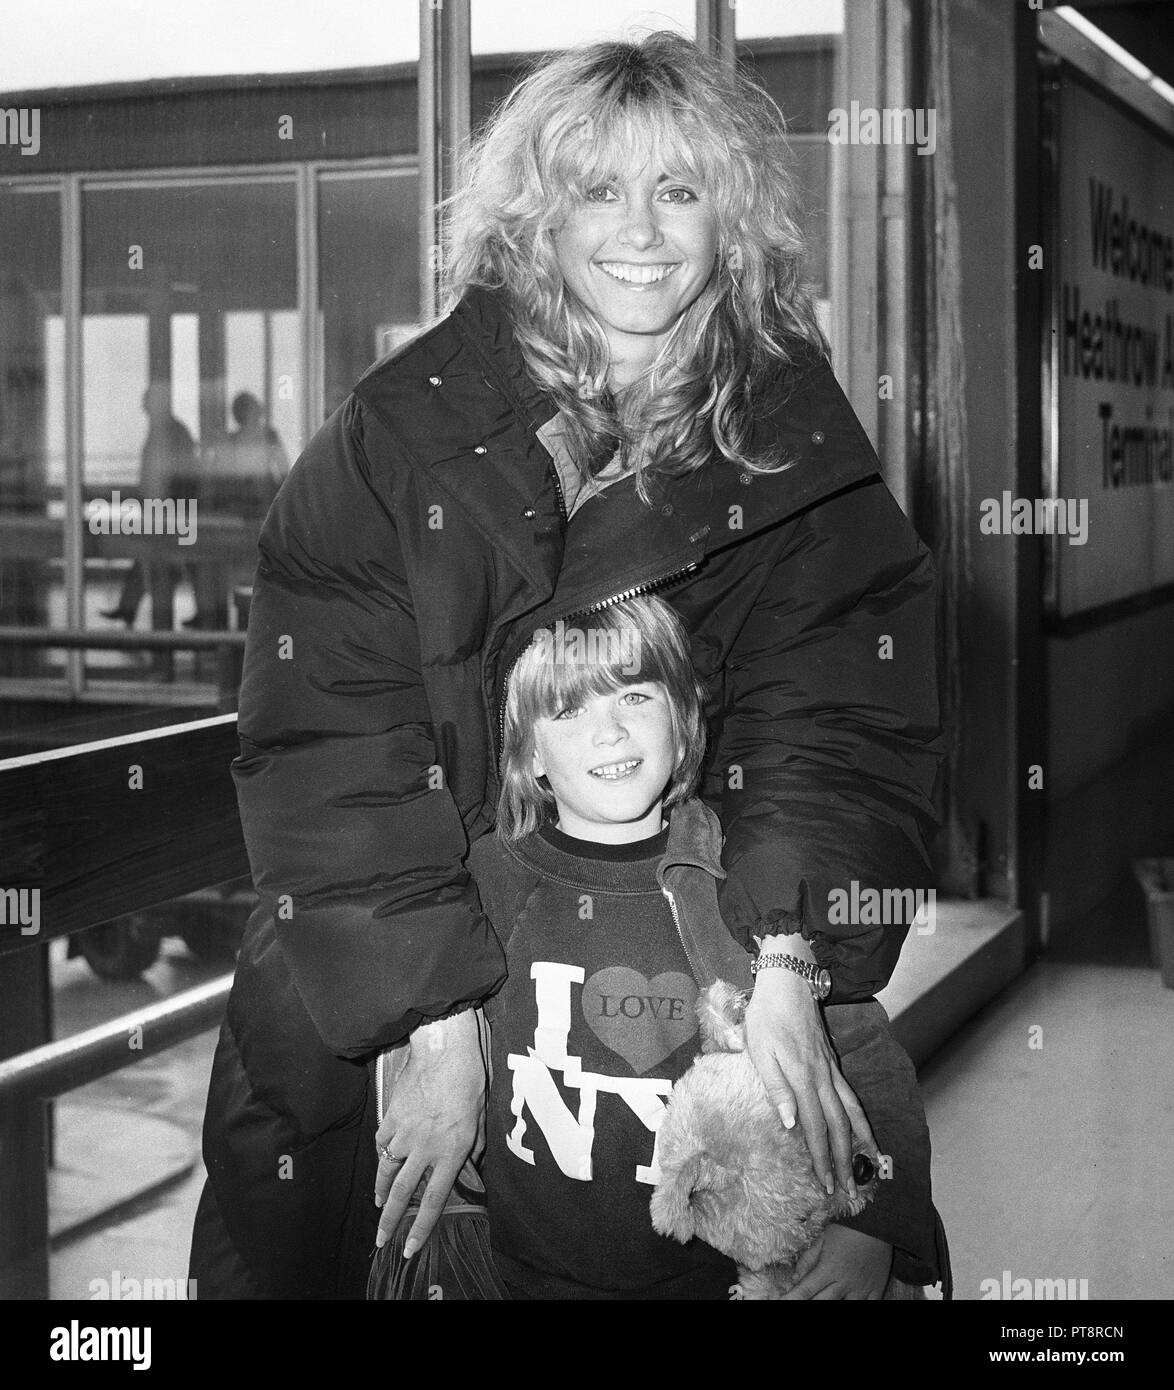 Singer, actress Olivia Newton John arriving at Heathrow Airport from Los Angeles with nephew Emerson in April 1980. Stock Photo